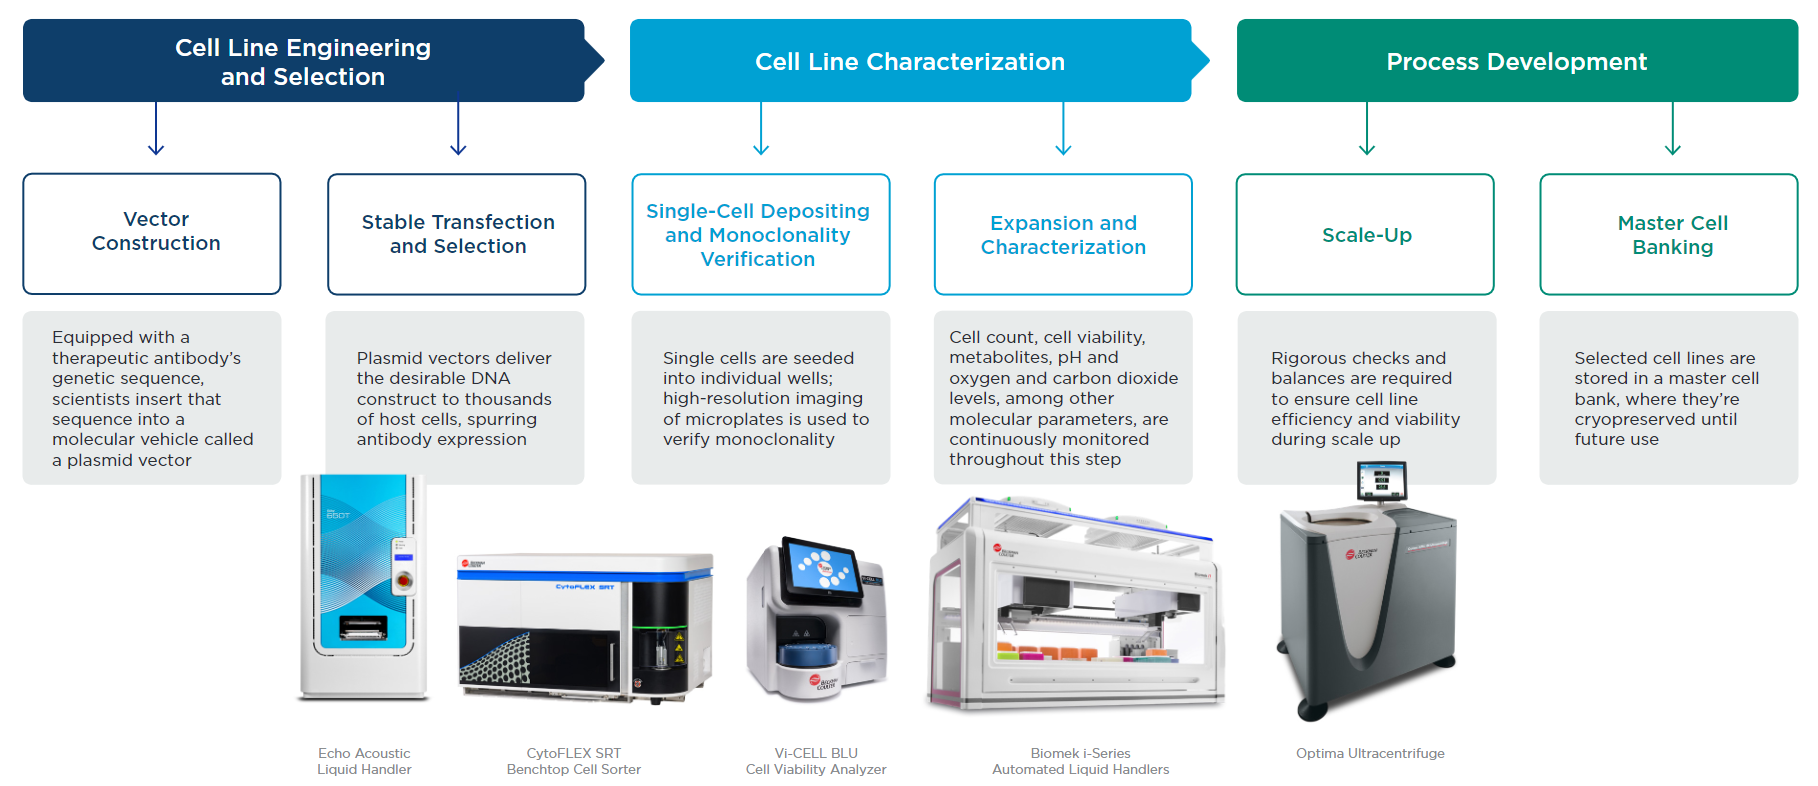 cell line engineering, cell line characterization, and process development steps in cell line development